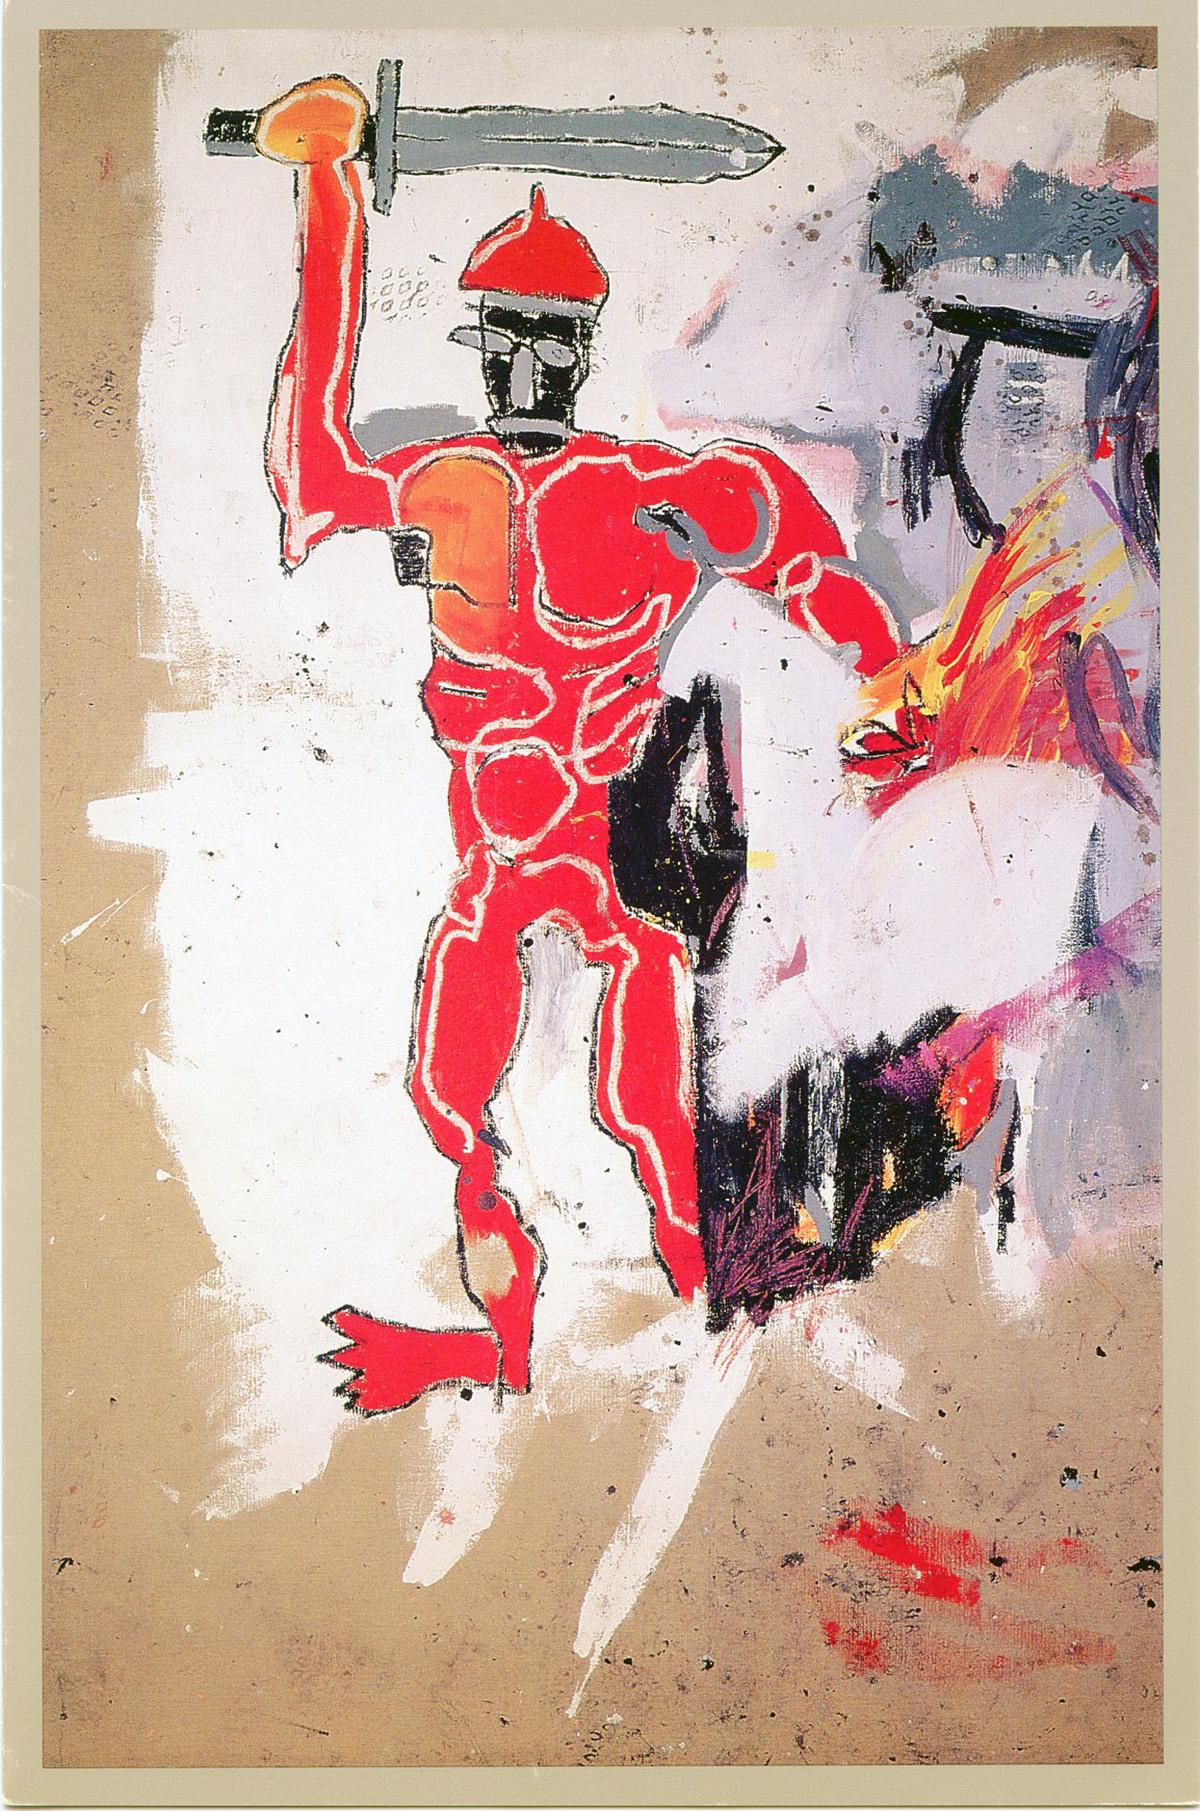 Basquiat at Vrej Baghoomian gallery 1989 (Basquiat Red Warrior announcement)  - Art by after Jean-Michel Basquiat